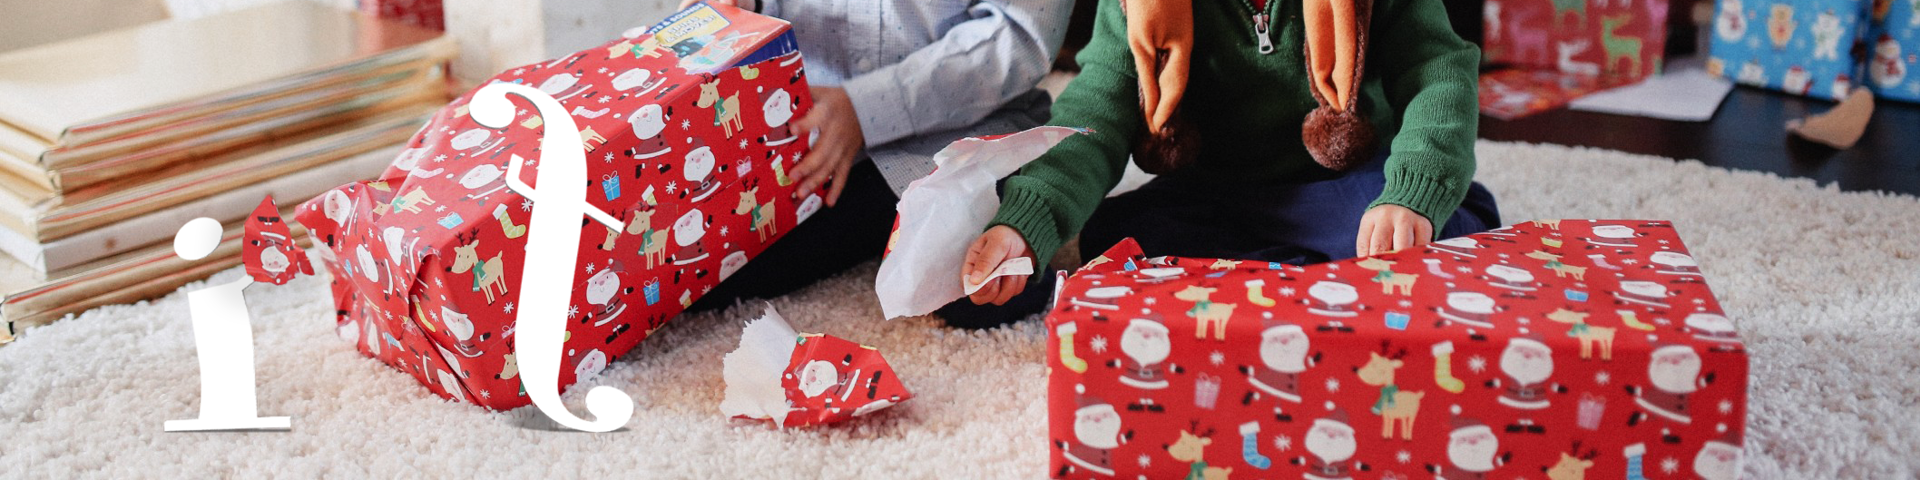 tow cute kids opening Christmas presents